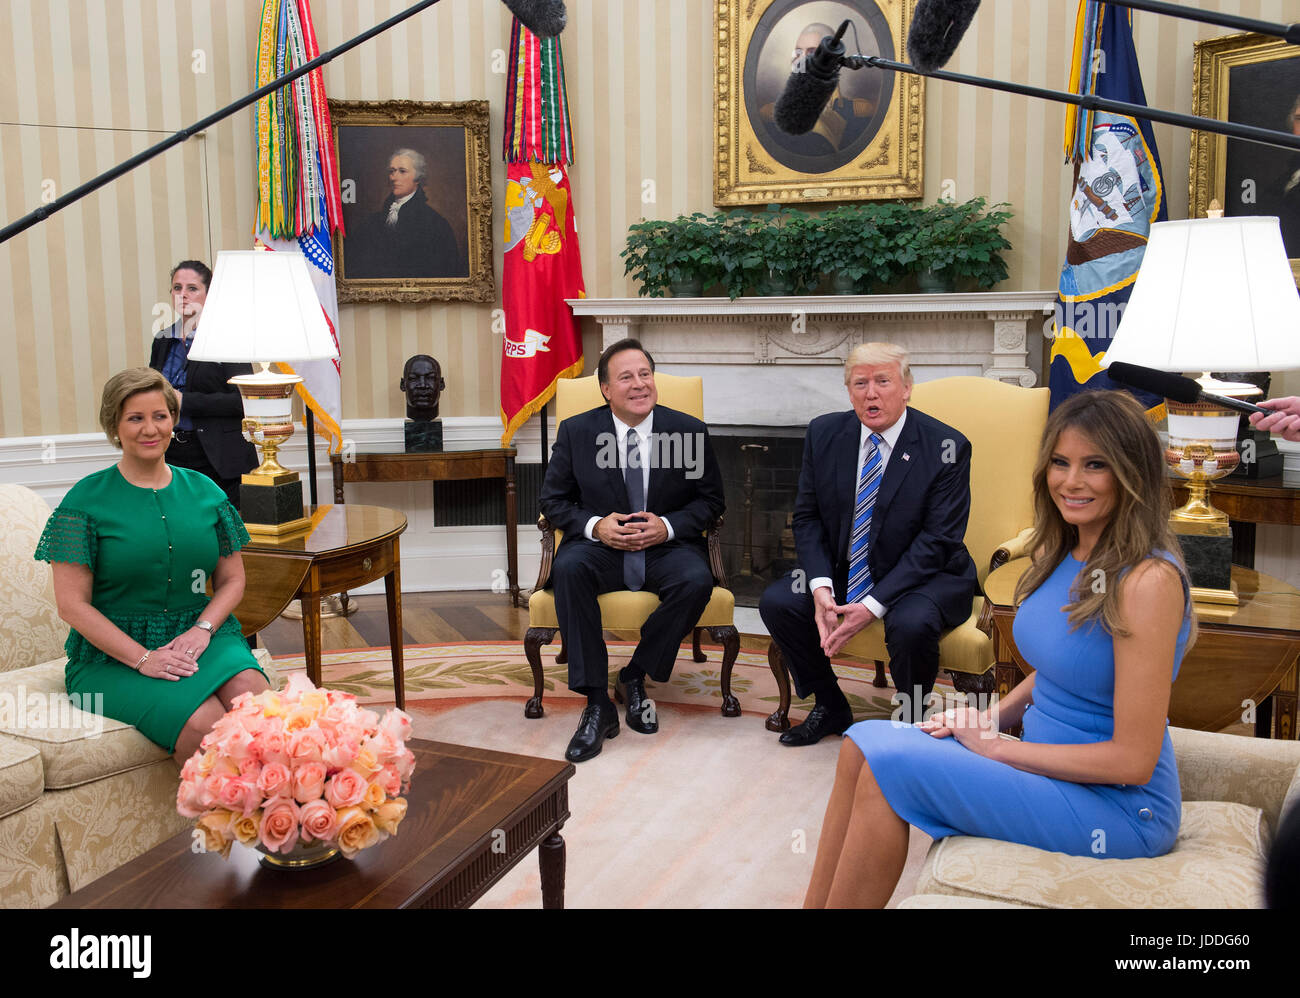 Washington DC, USA. 19th June, 2017. United States President Donald J. Trump meets with President Juan Carlos Varela of Panama in the Oval Office of the White House in Washington, DC on June 19, 2017. Also seated are Lorena Castillo, left, and first lady Melanie Trump, right. Credit: Molly Riley/CNP /MediaPunch/Alamy Live News Stock Photo